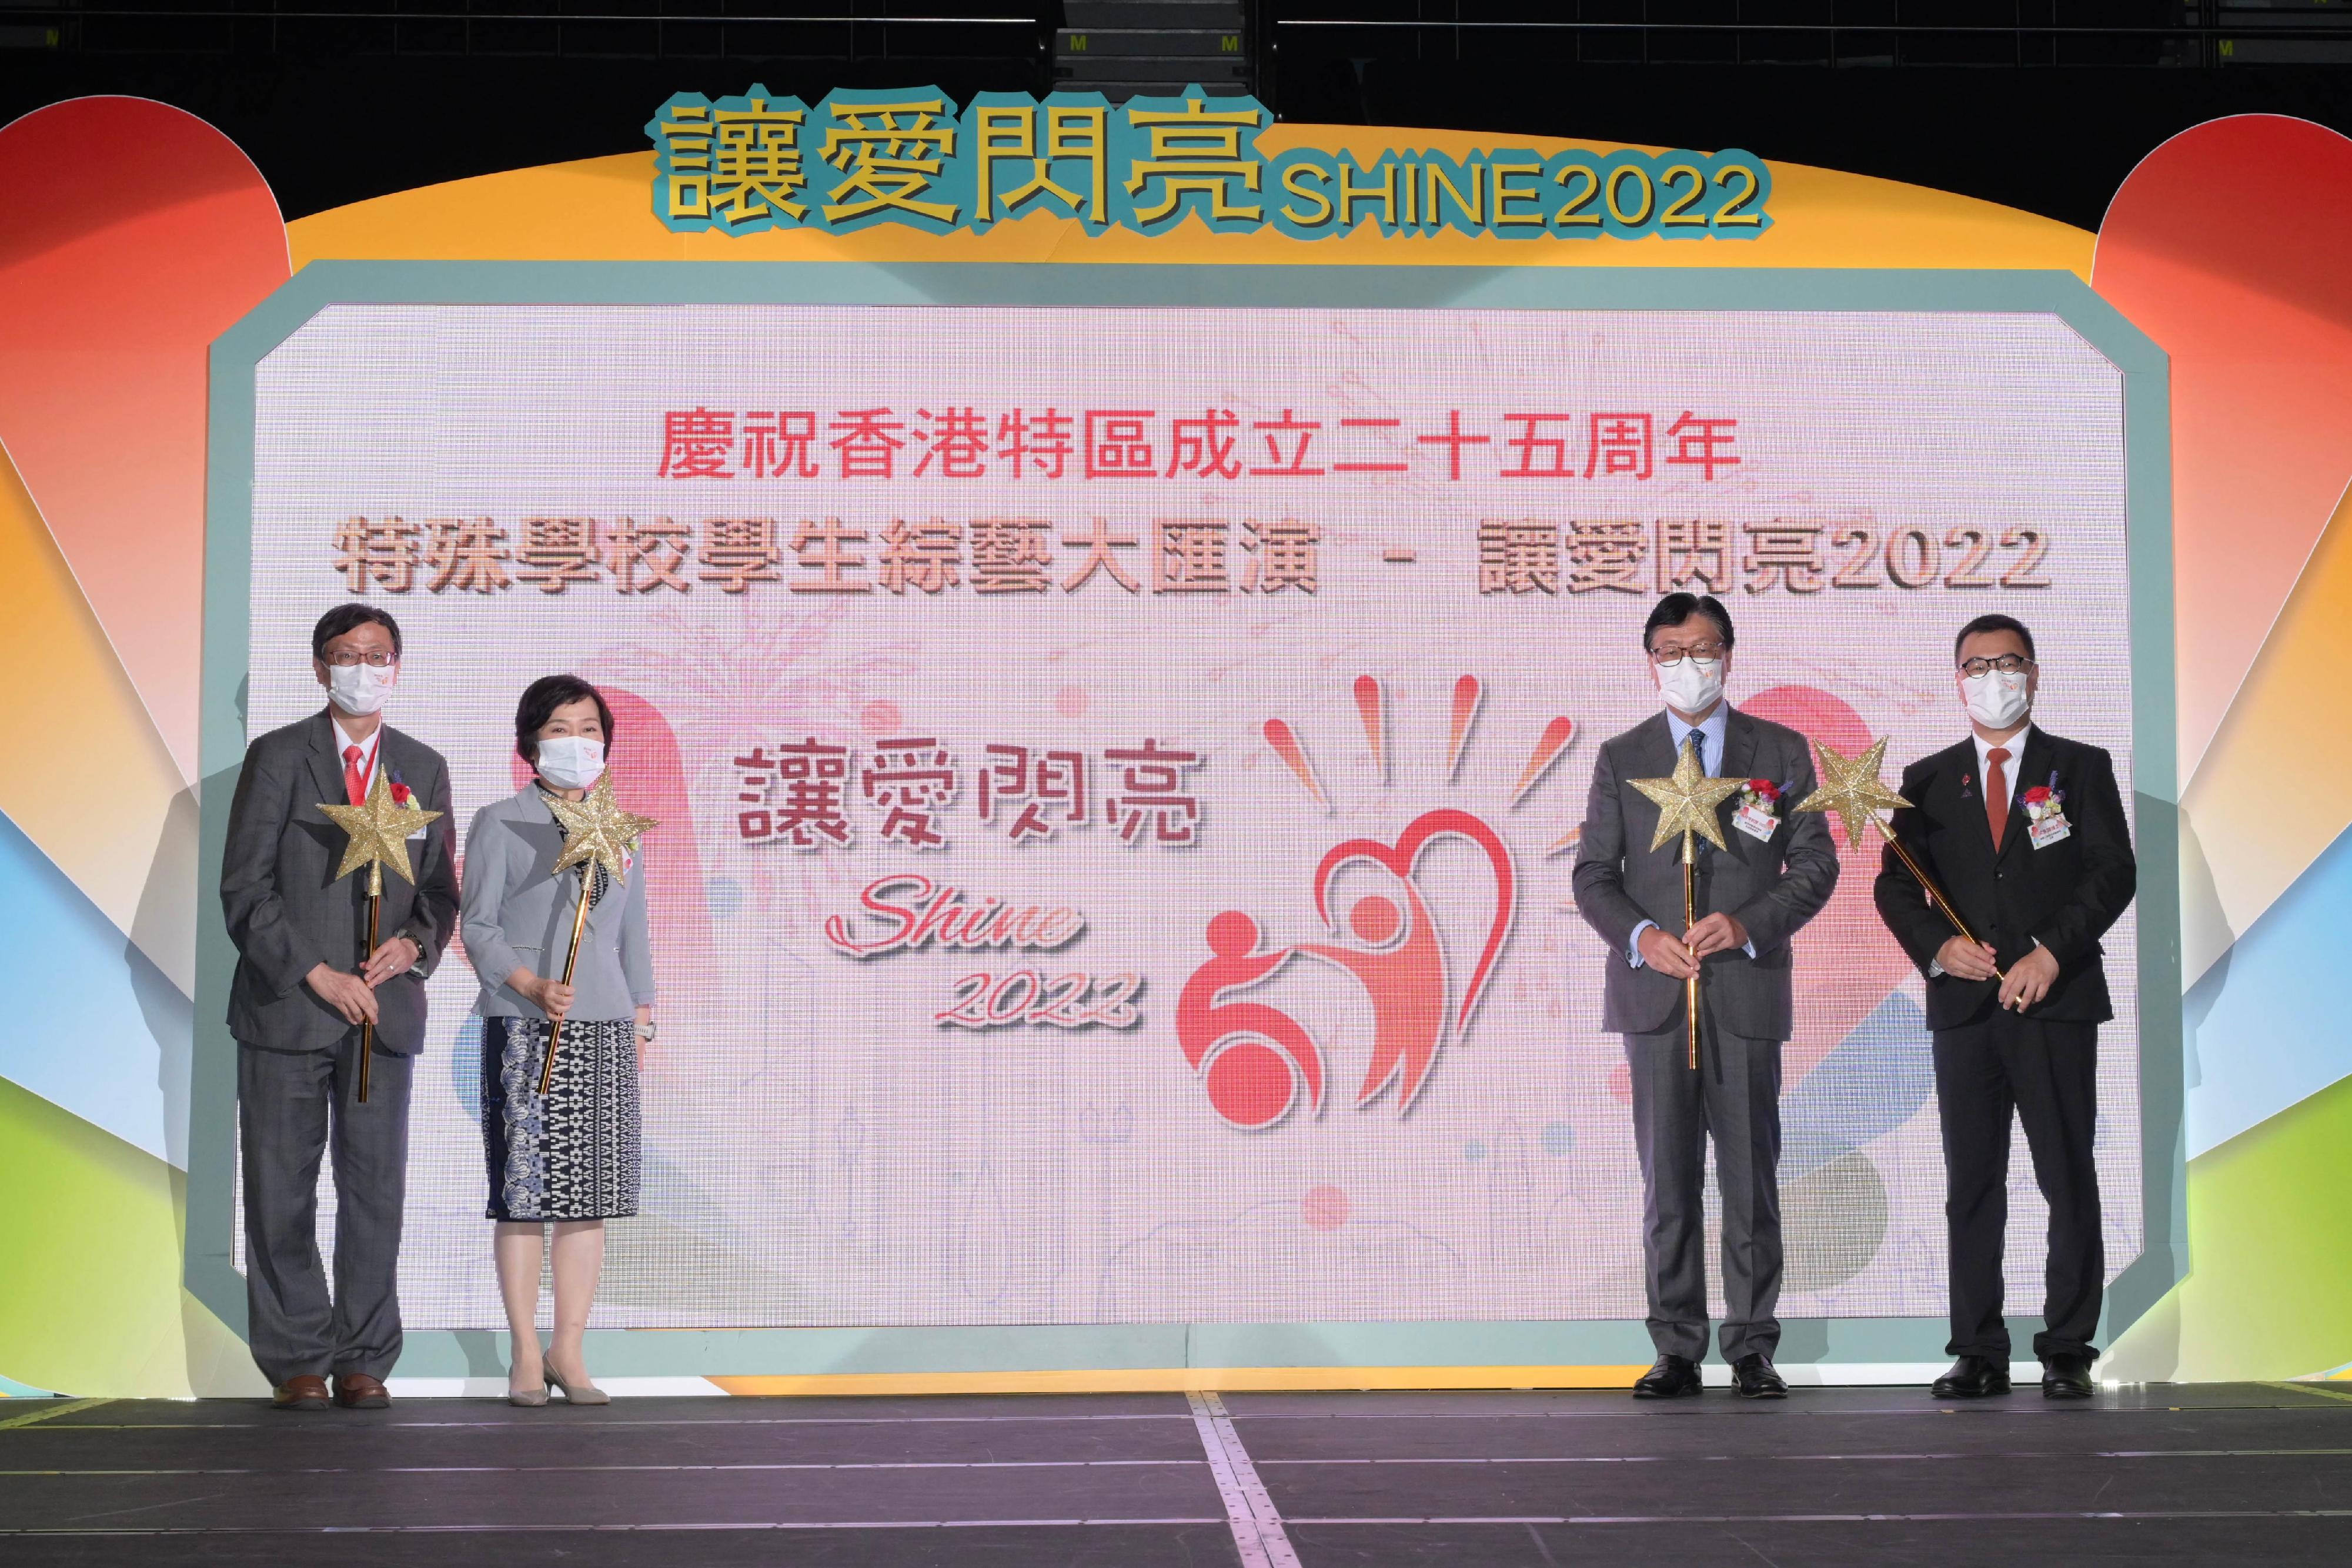 The Education Bureau, together with the Hong Kong Special Schools Council (HKSSC) and the Education University of Hong Kong (EdUHK), organised the "Variety Show of Special School Students - Let Your Love Shine 2022" today (August 11). The Secretary for Education, Dr Choi Yuk-lin (second left); the Permanent Honourable President of the HKSSC, Professor Ma Si-hang (second right); the Vice President (Academic) and Provost of the EdUHK, Professor Lee Chi-kin (first left); and the Chairman of the "Let Your Love Shine 2022" Organising Committee, Dr Leung Wing-hung (first right), officiated at the event.